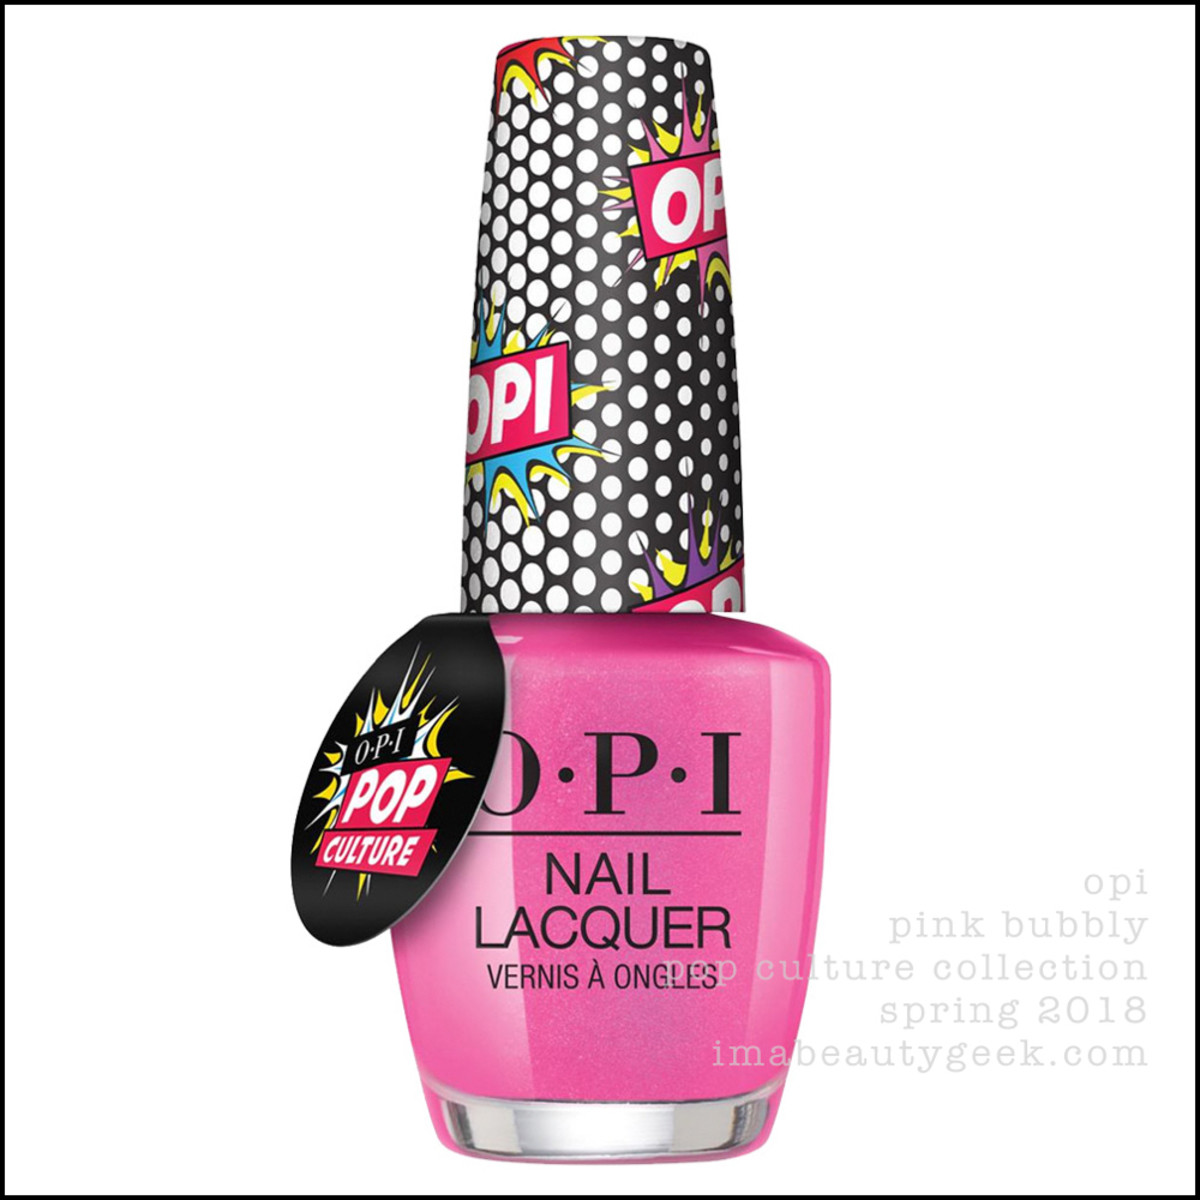 OPI Pop Culture Collection 2018 - OPI Pink Bubbly